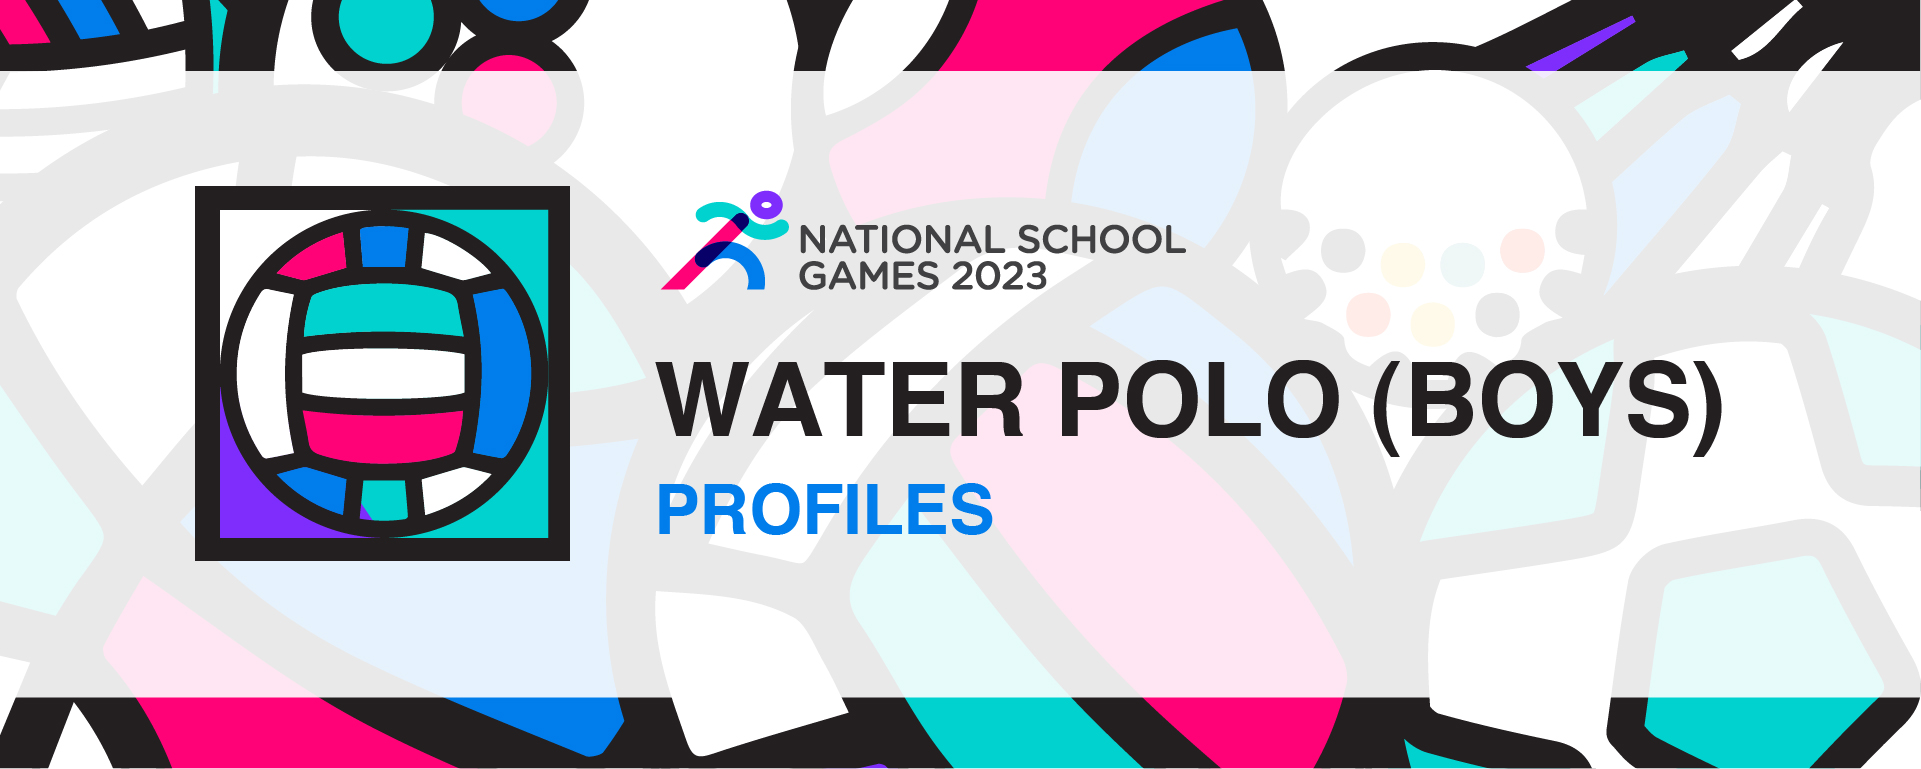 National School Games 2023 | Water Polo | Profile